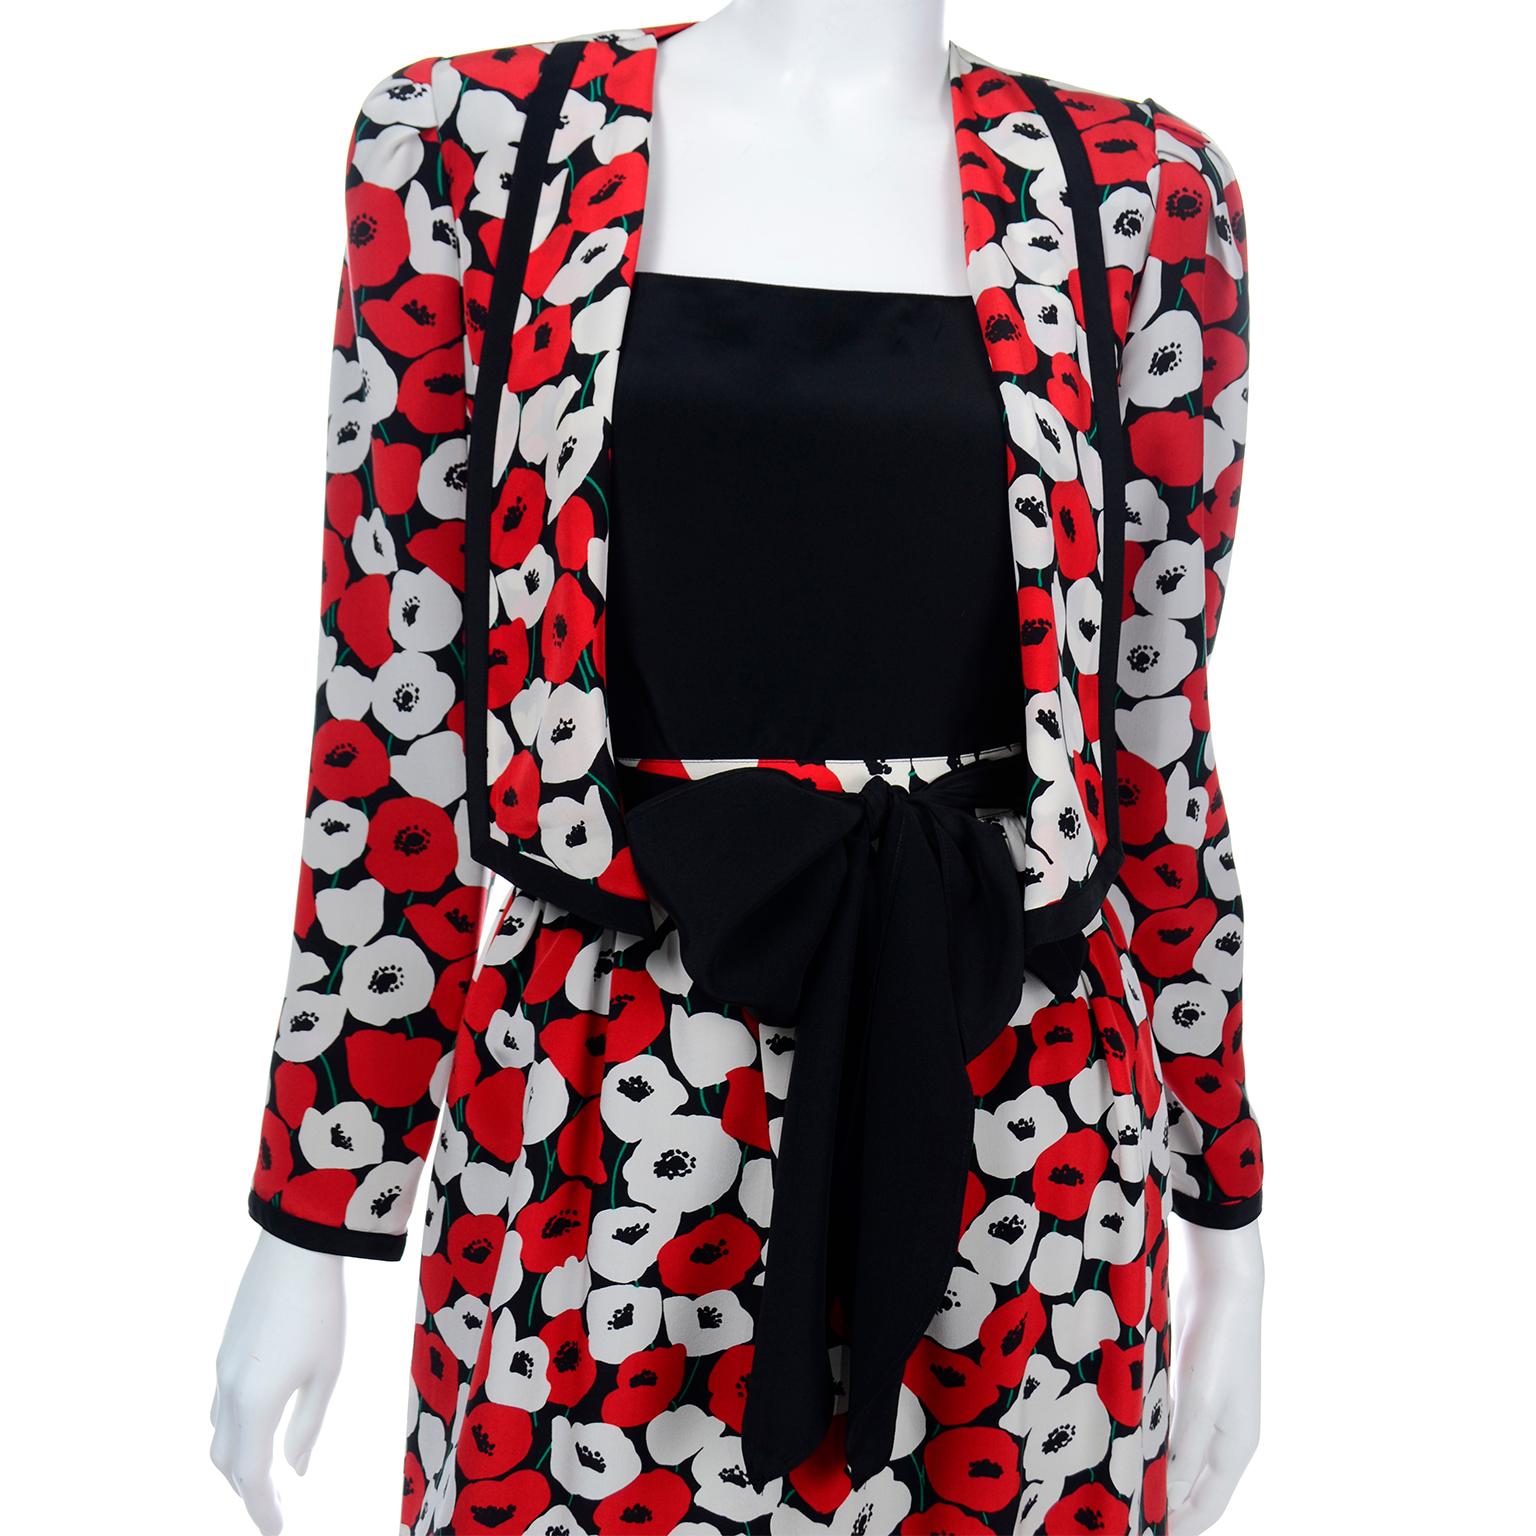 Louis Feraud 4 pc Red Poppy Print Silk Skirt Top and Jacket Suit With Sash Belt 3